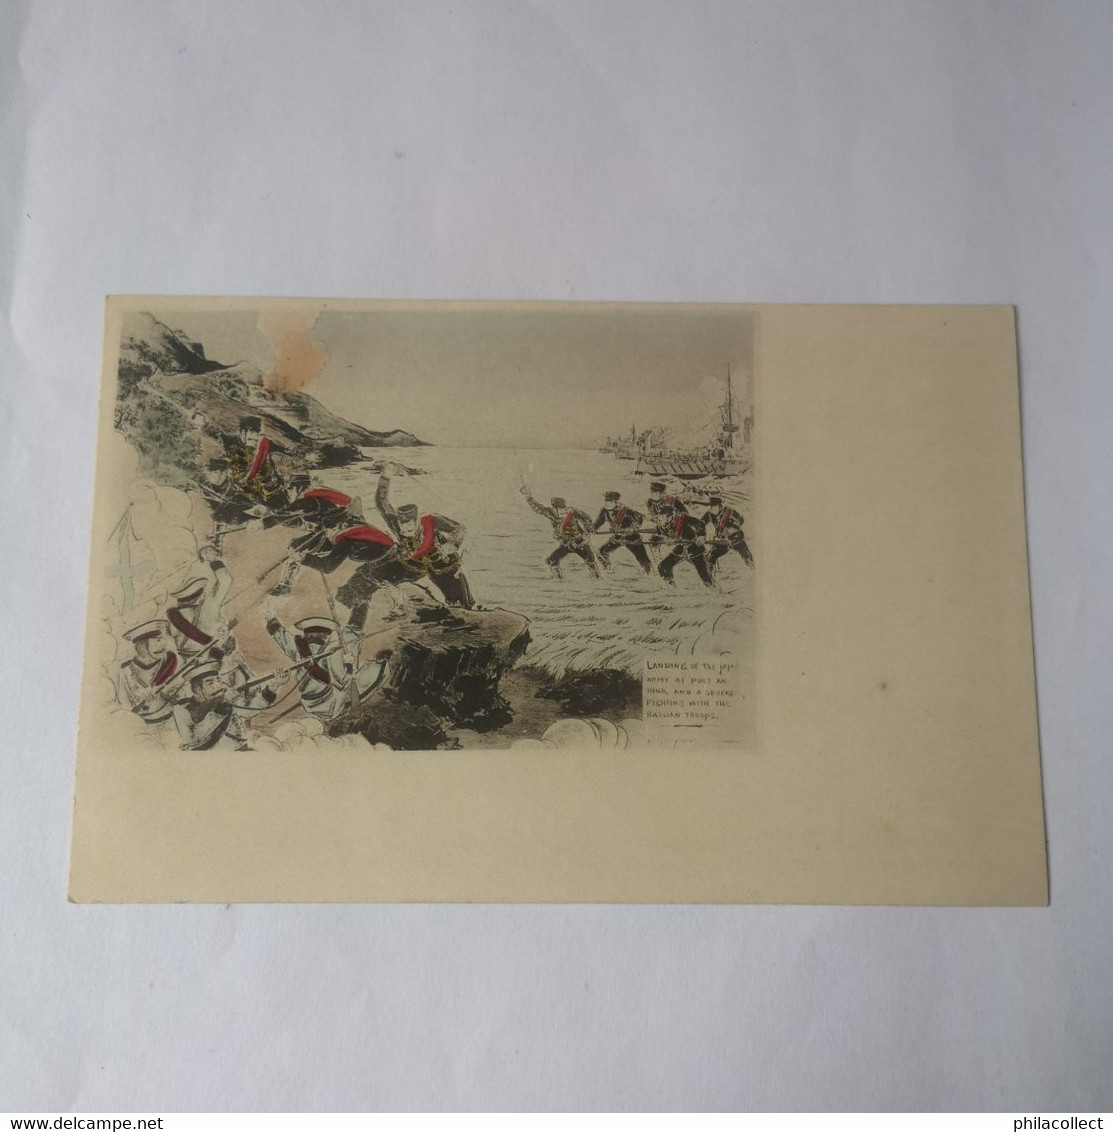 Militaire No.12.around Port Arthur  Russian - Japan 1905 Russia - Japonais Guerre 1905 Collored Not Used 1905 Rare - Other Wars